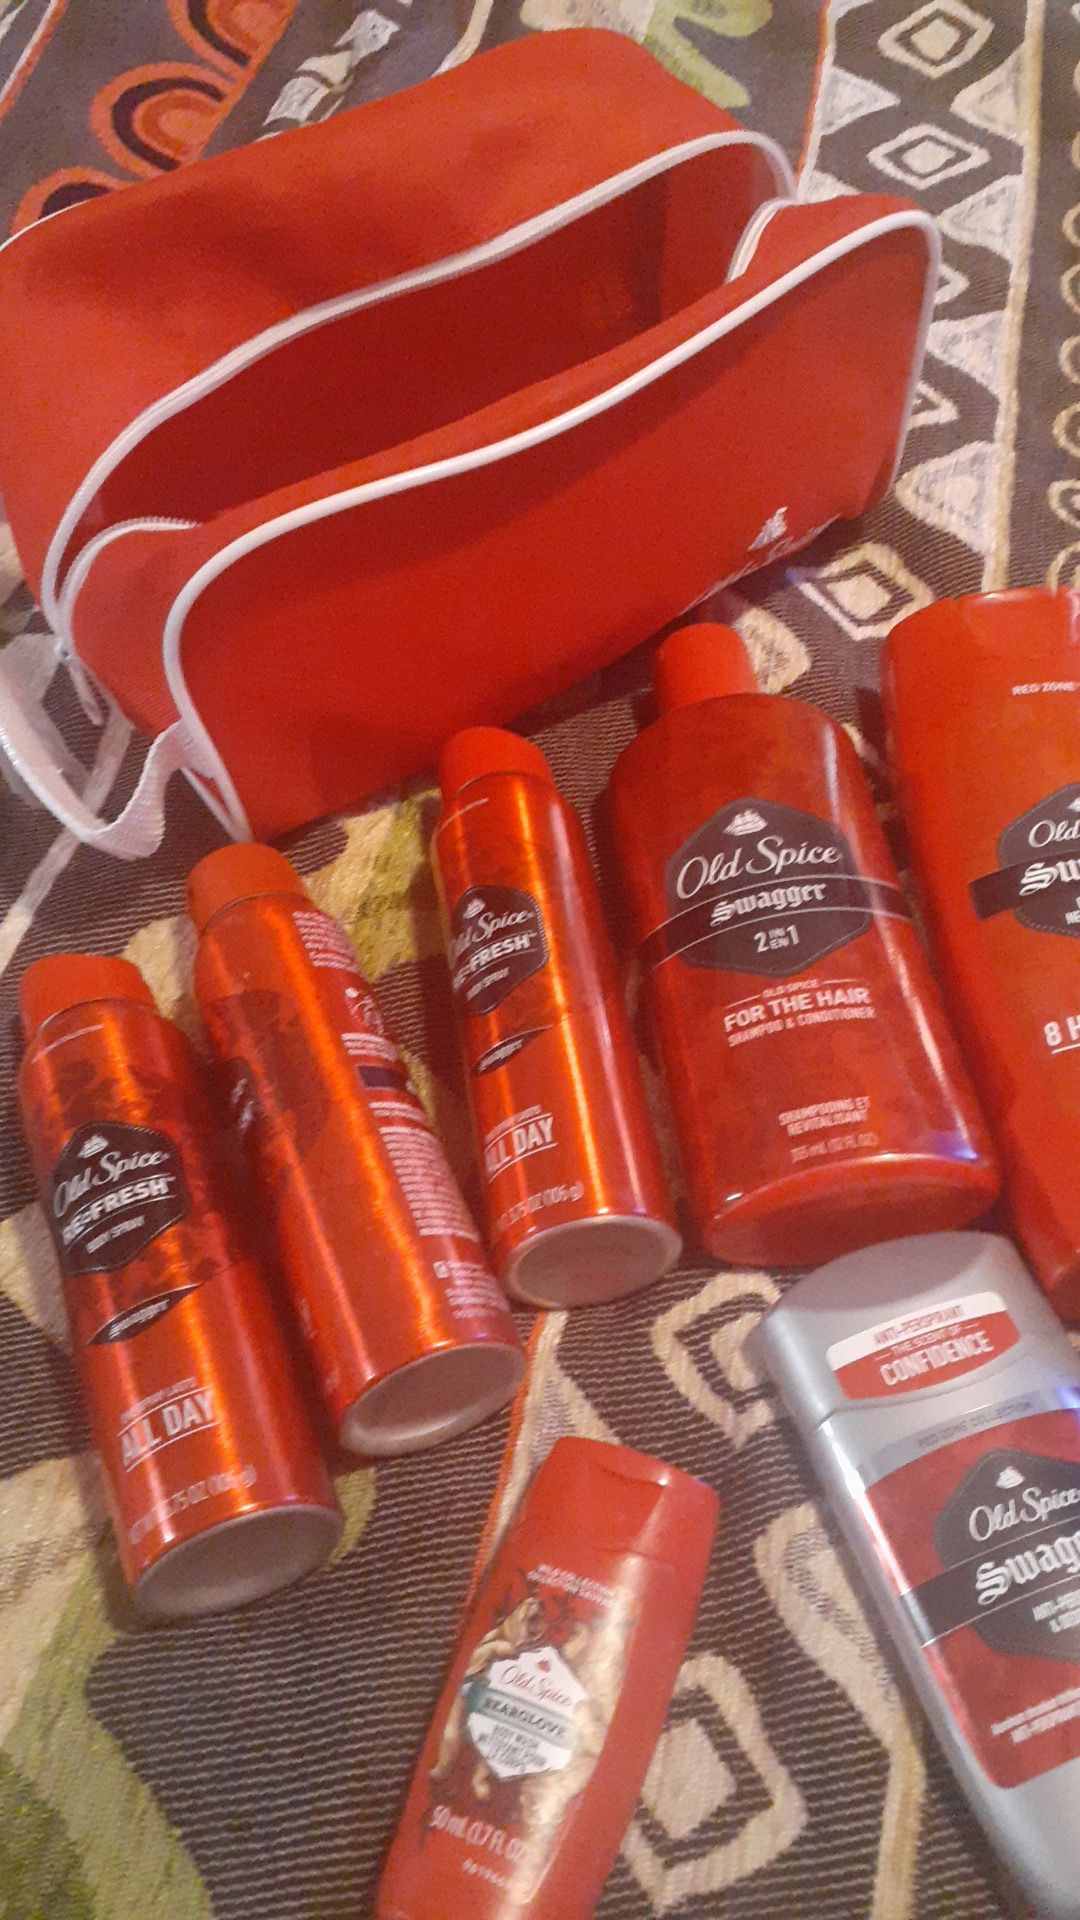 Old spice swagger